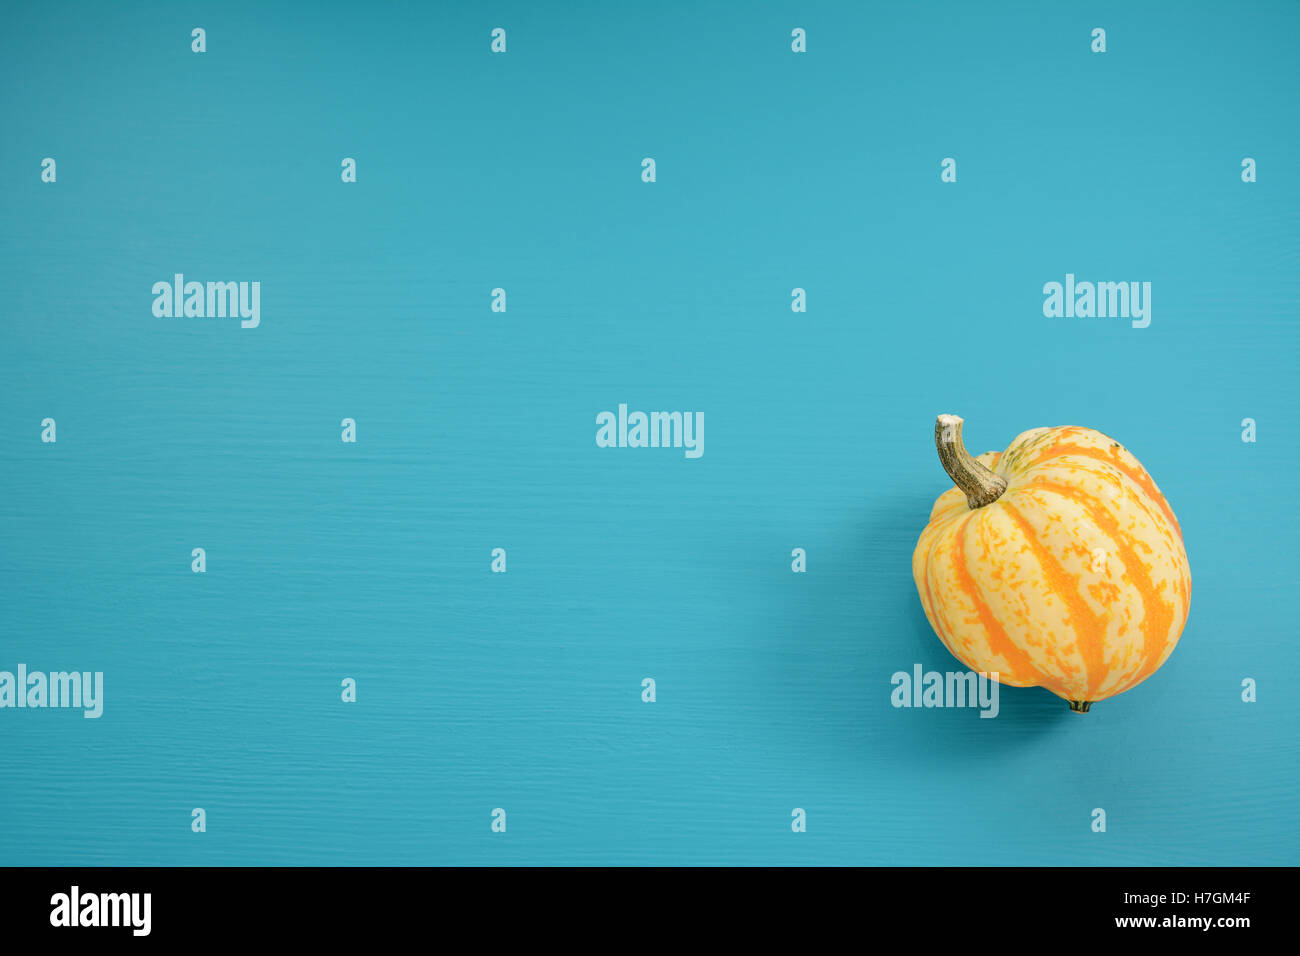 Yellow striped Festival squash, on a teal painted wooden background with copy space Stock Photo